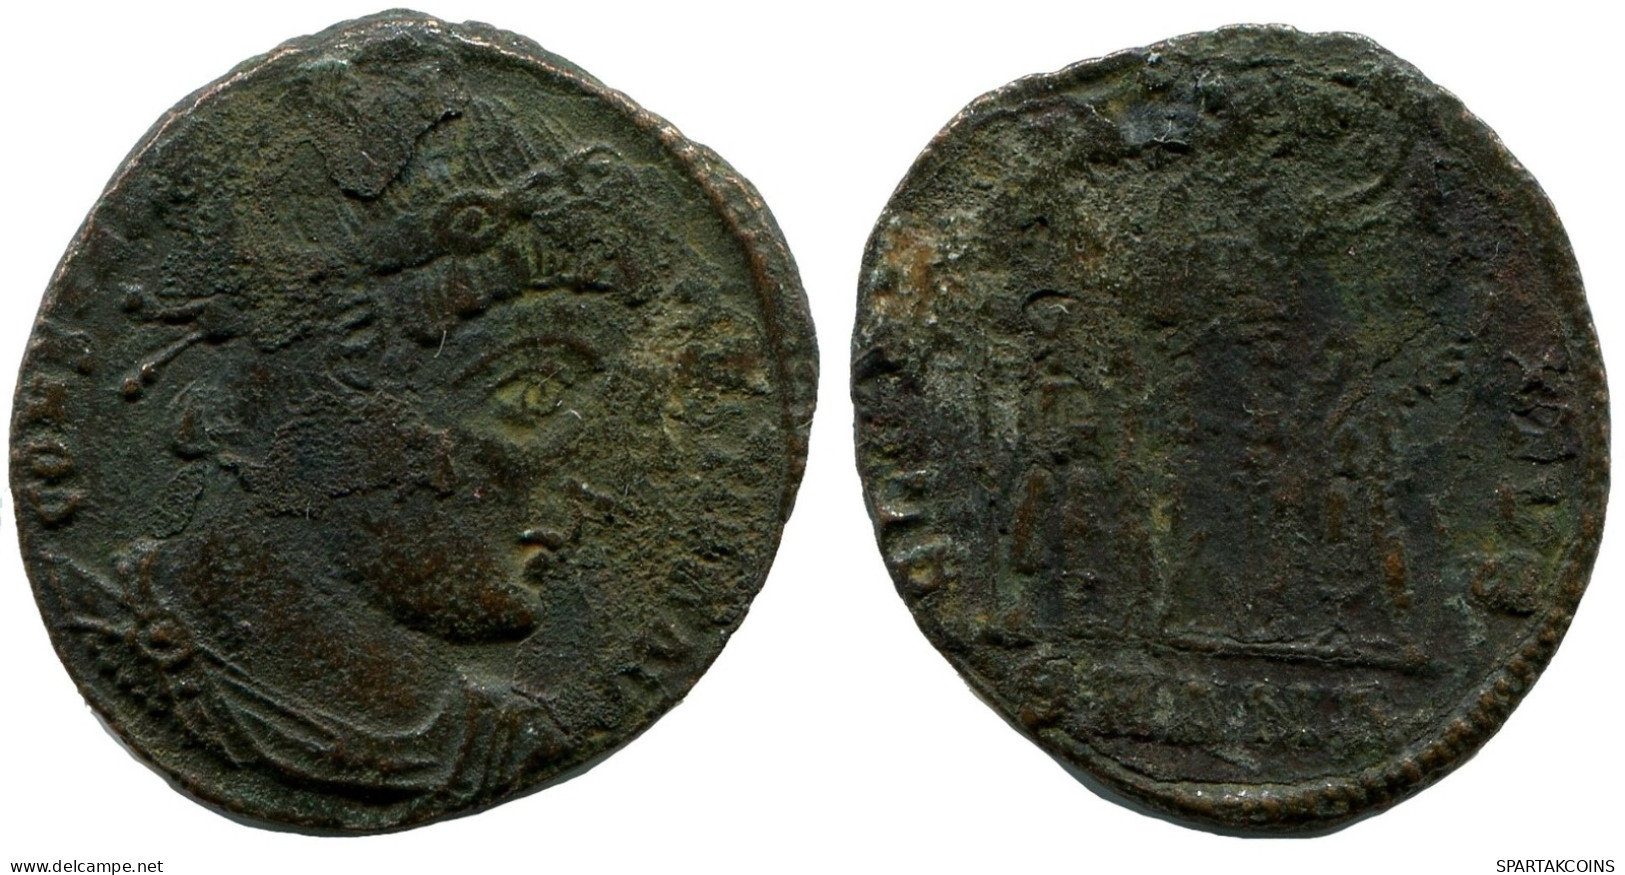 CONSTANTINE I MINTED IN ANTIOCH FOUND IN IHNASYAH HOARD EGYPT #ANC10590.14.E.A - The Christian Empire (307 AD Tot 363 AD)